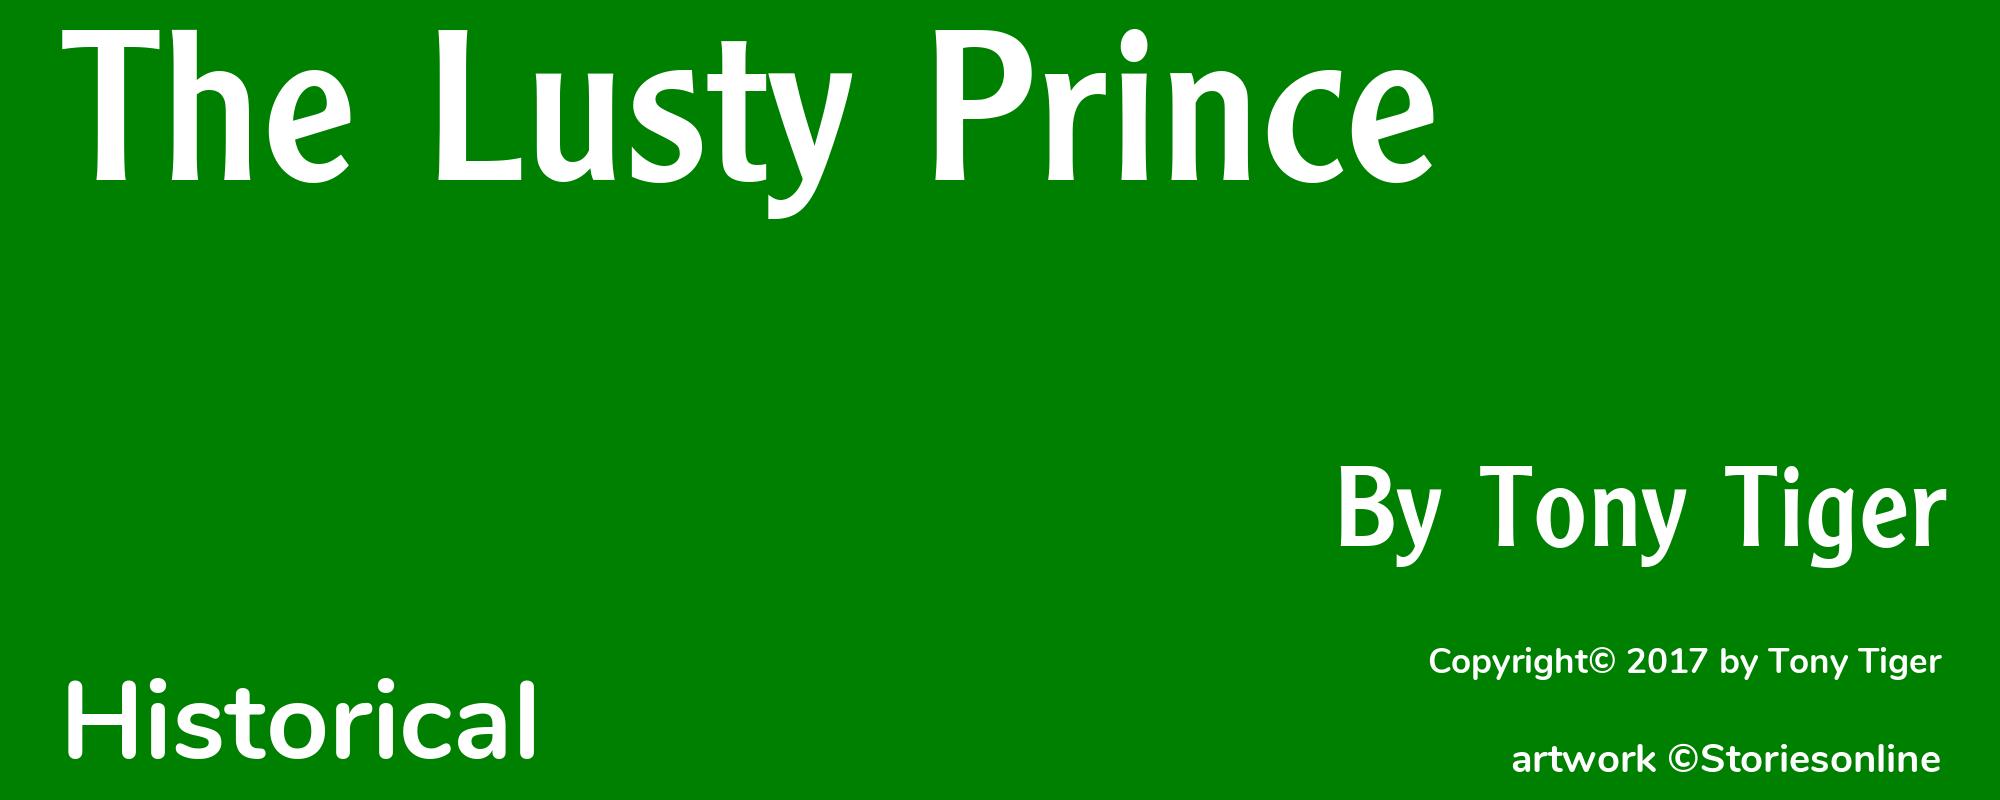 The Lusty Prince - Cover